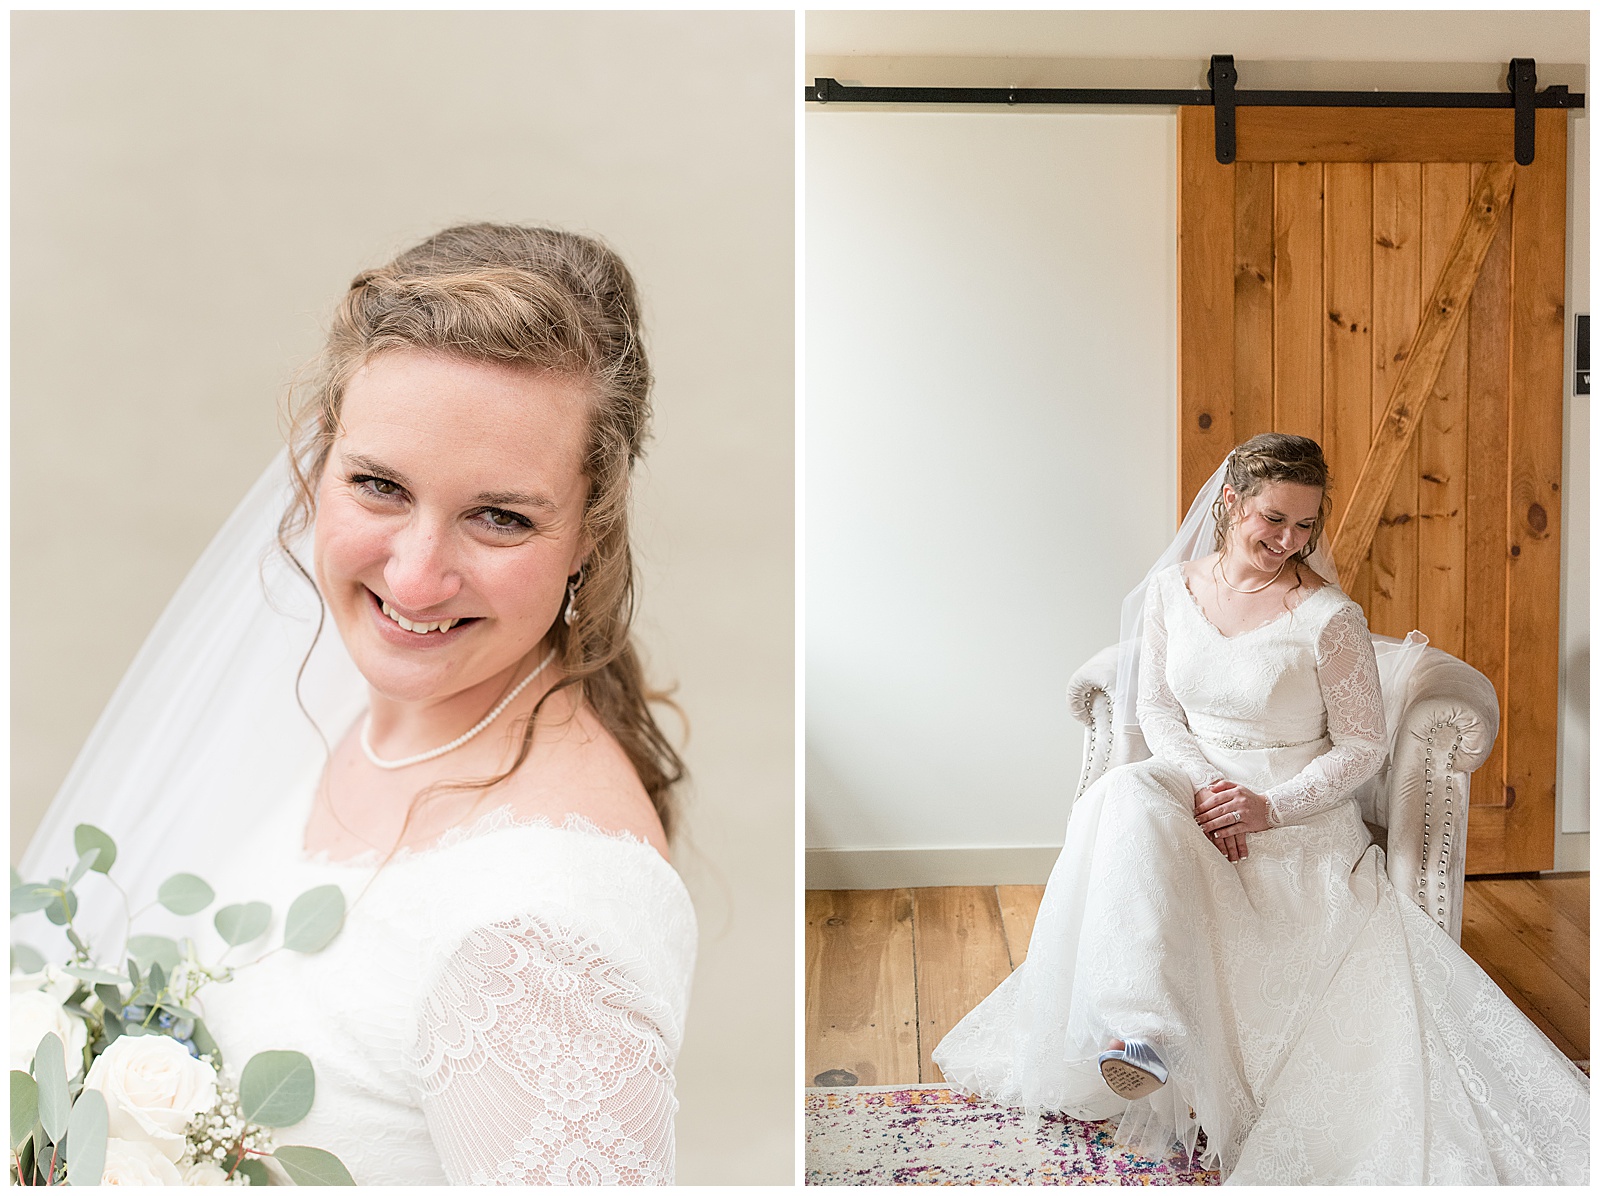 bride wearing ivory gown and holding bouquet with eucalyptus and white roses by wooden barn door